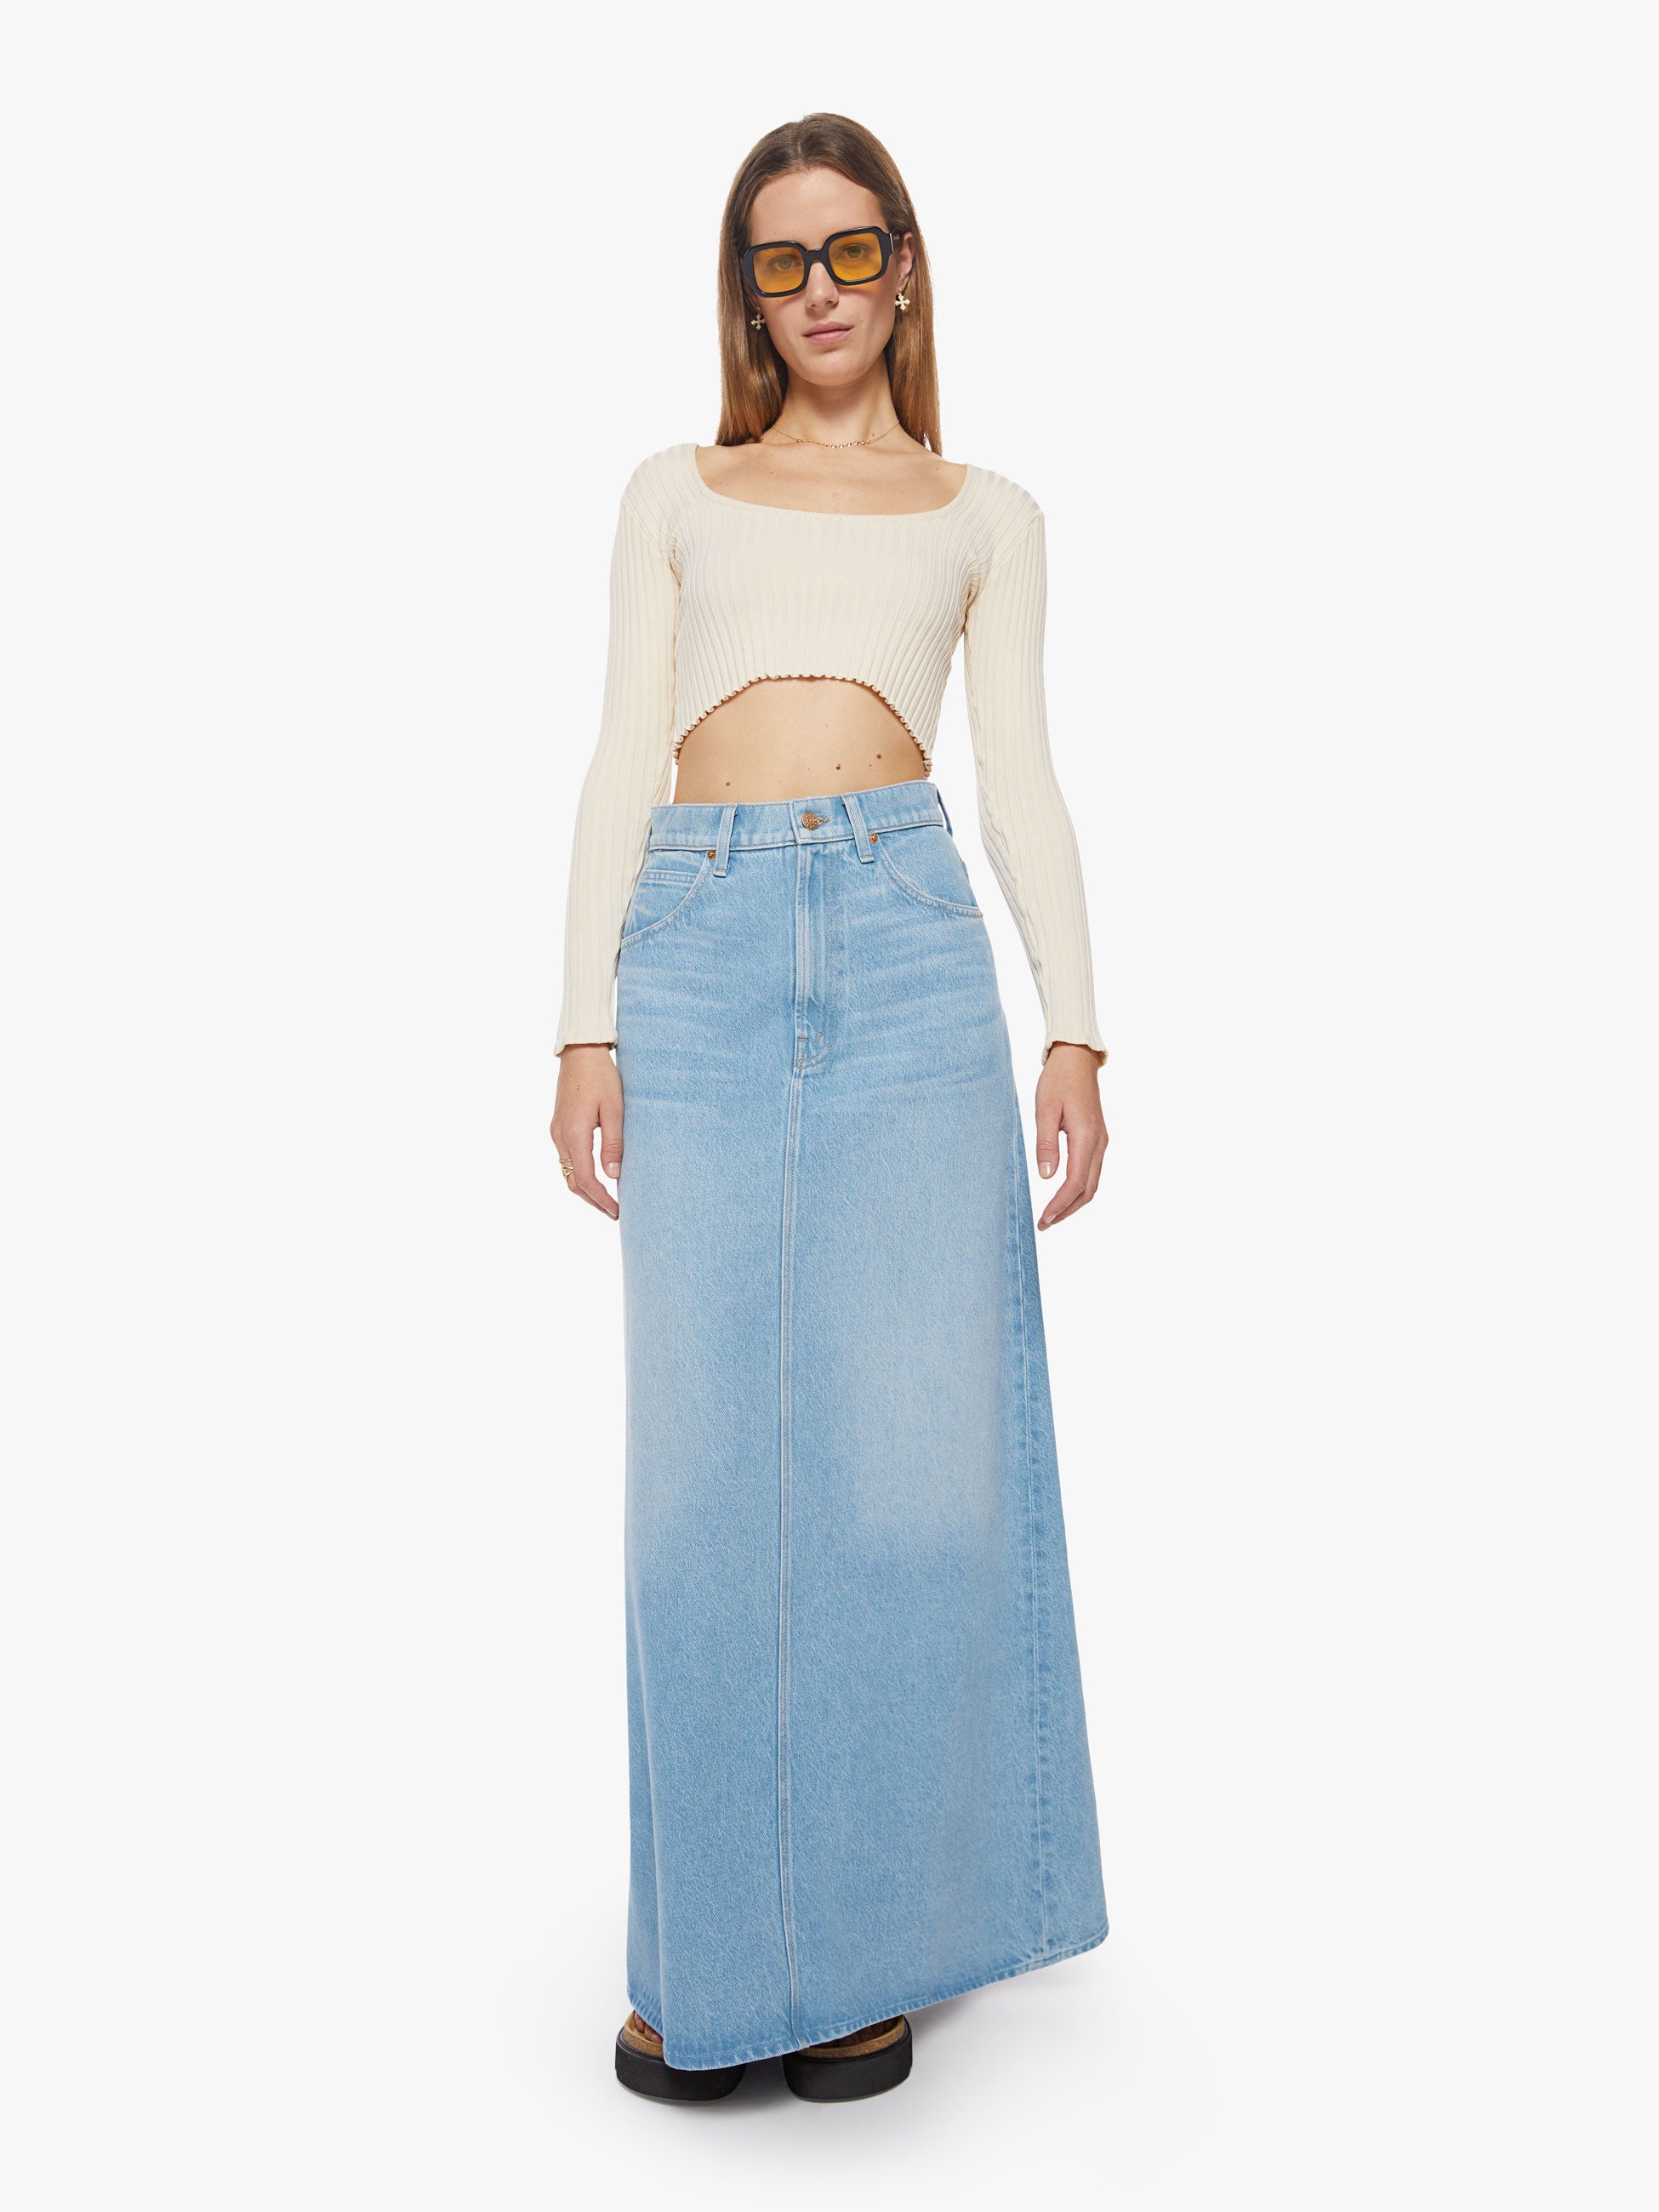 SNACKS! THE SUGAR CONE MAXI SKIRT SWEET AND SOUR | MOTHER DENIM